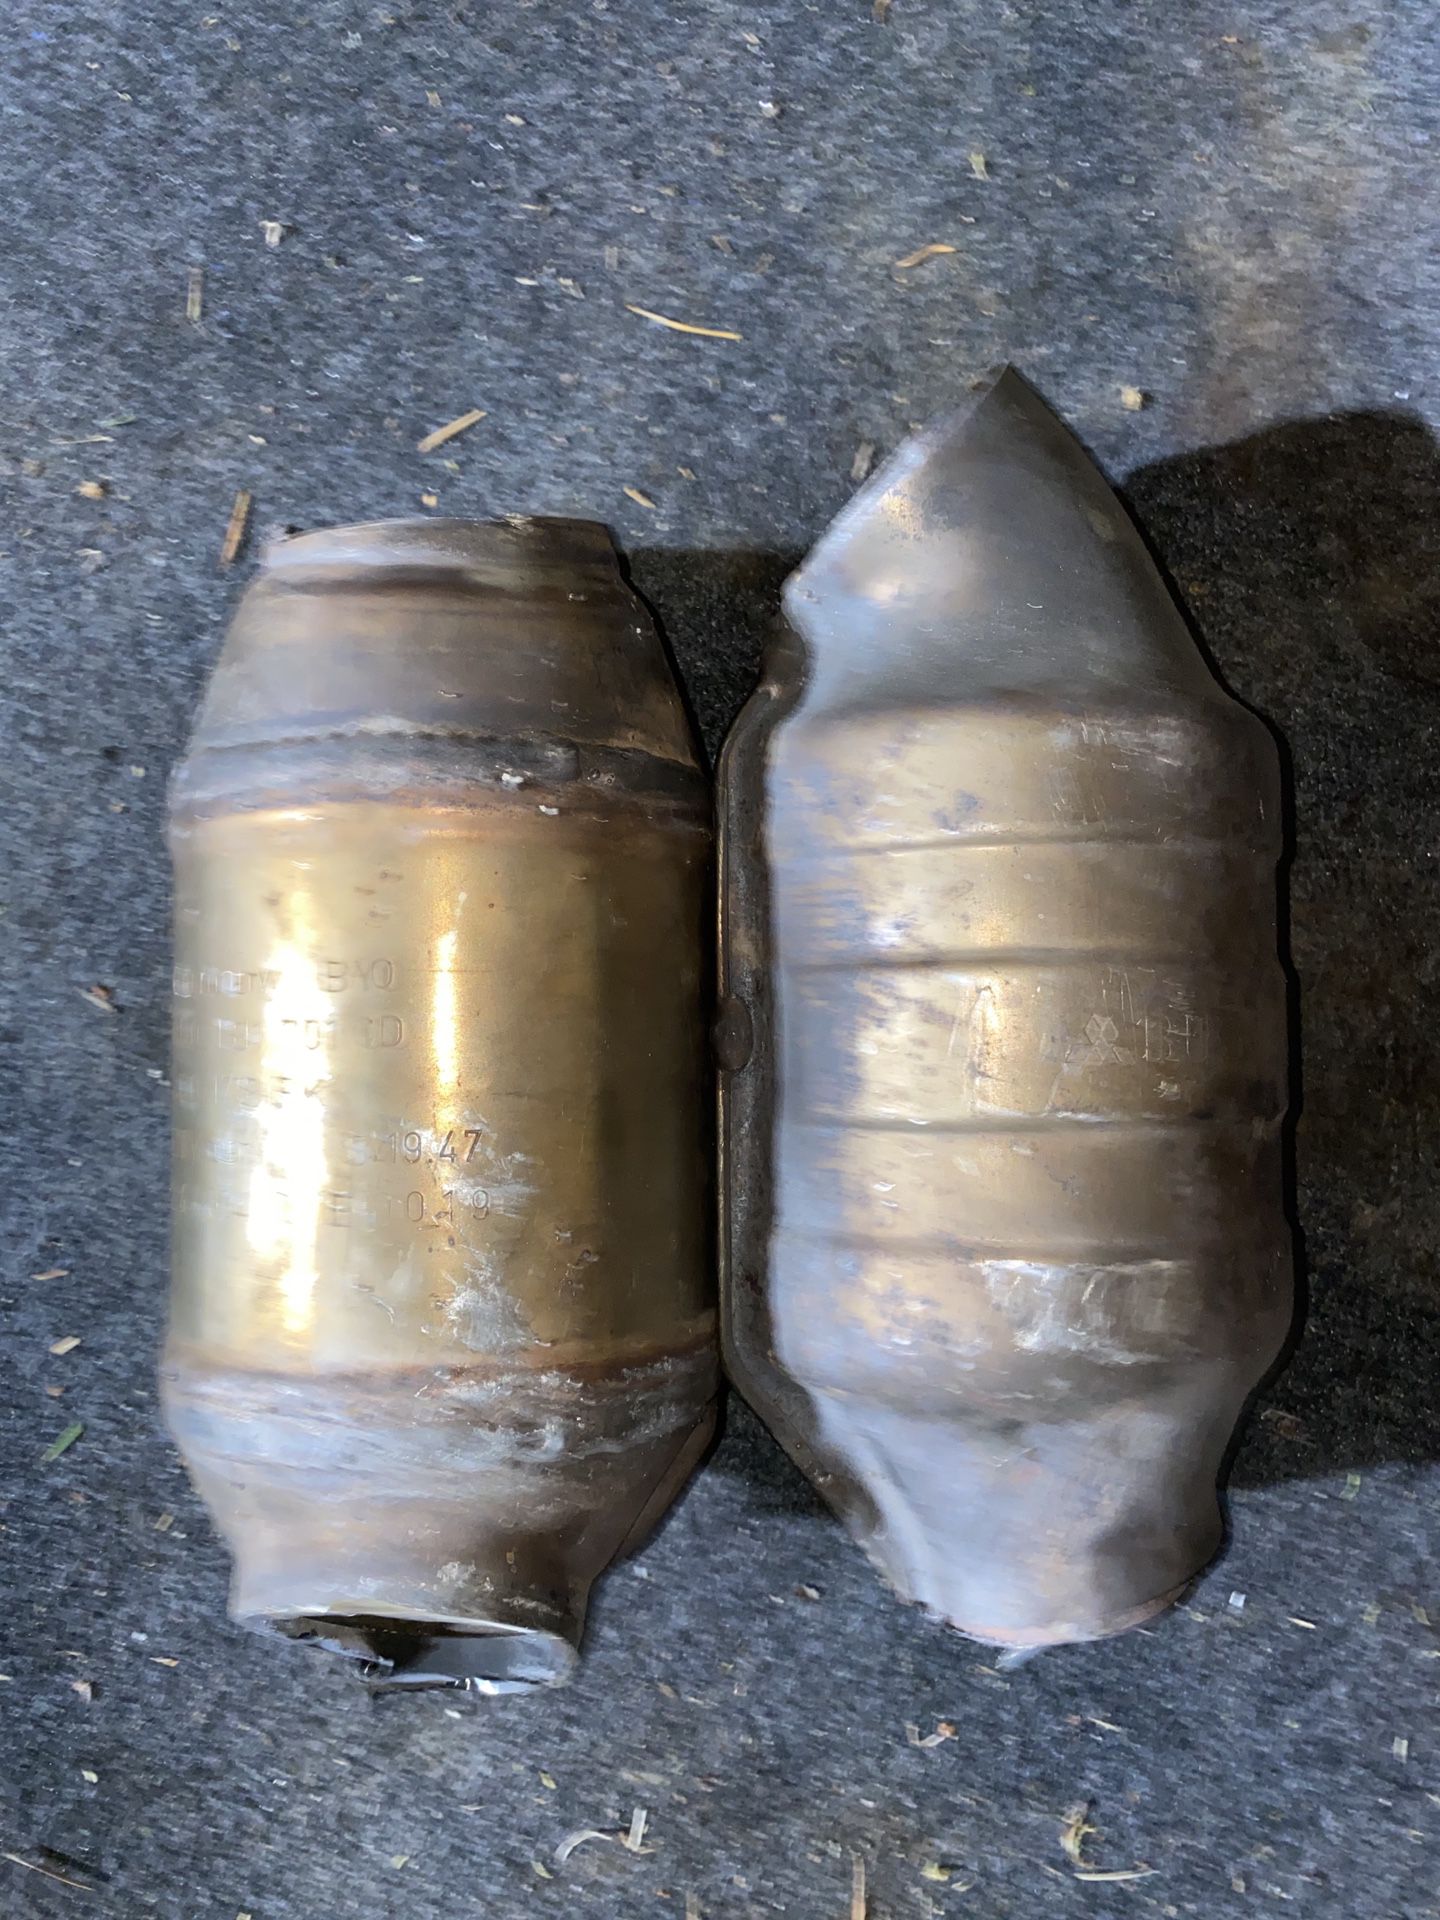 2 Catalytic Converters $500 OR BEST OFFER TAKES THEM